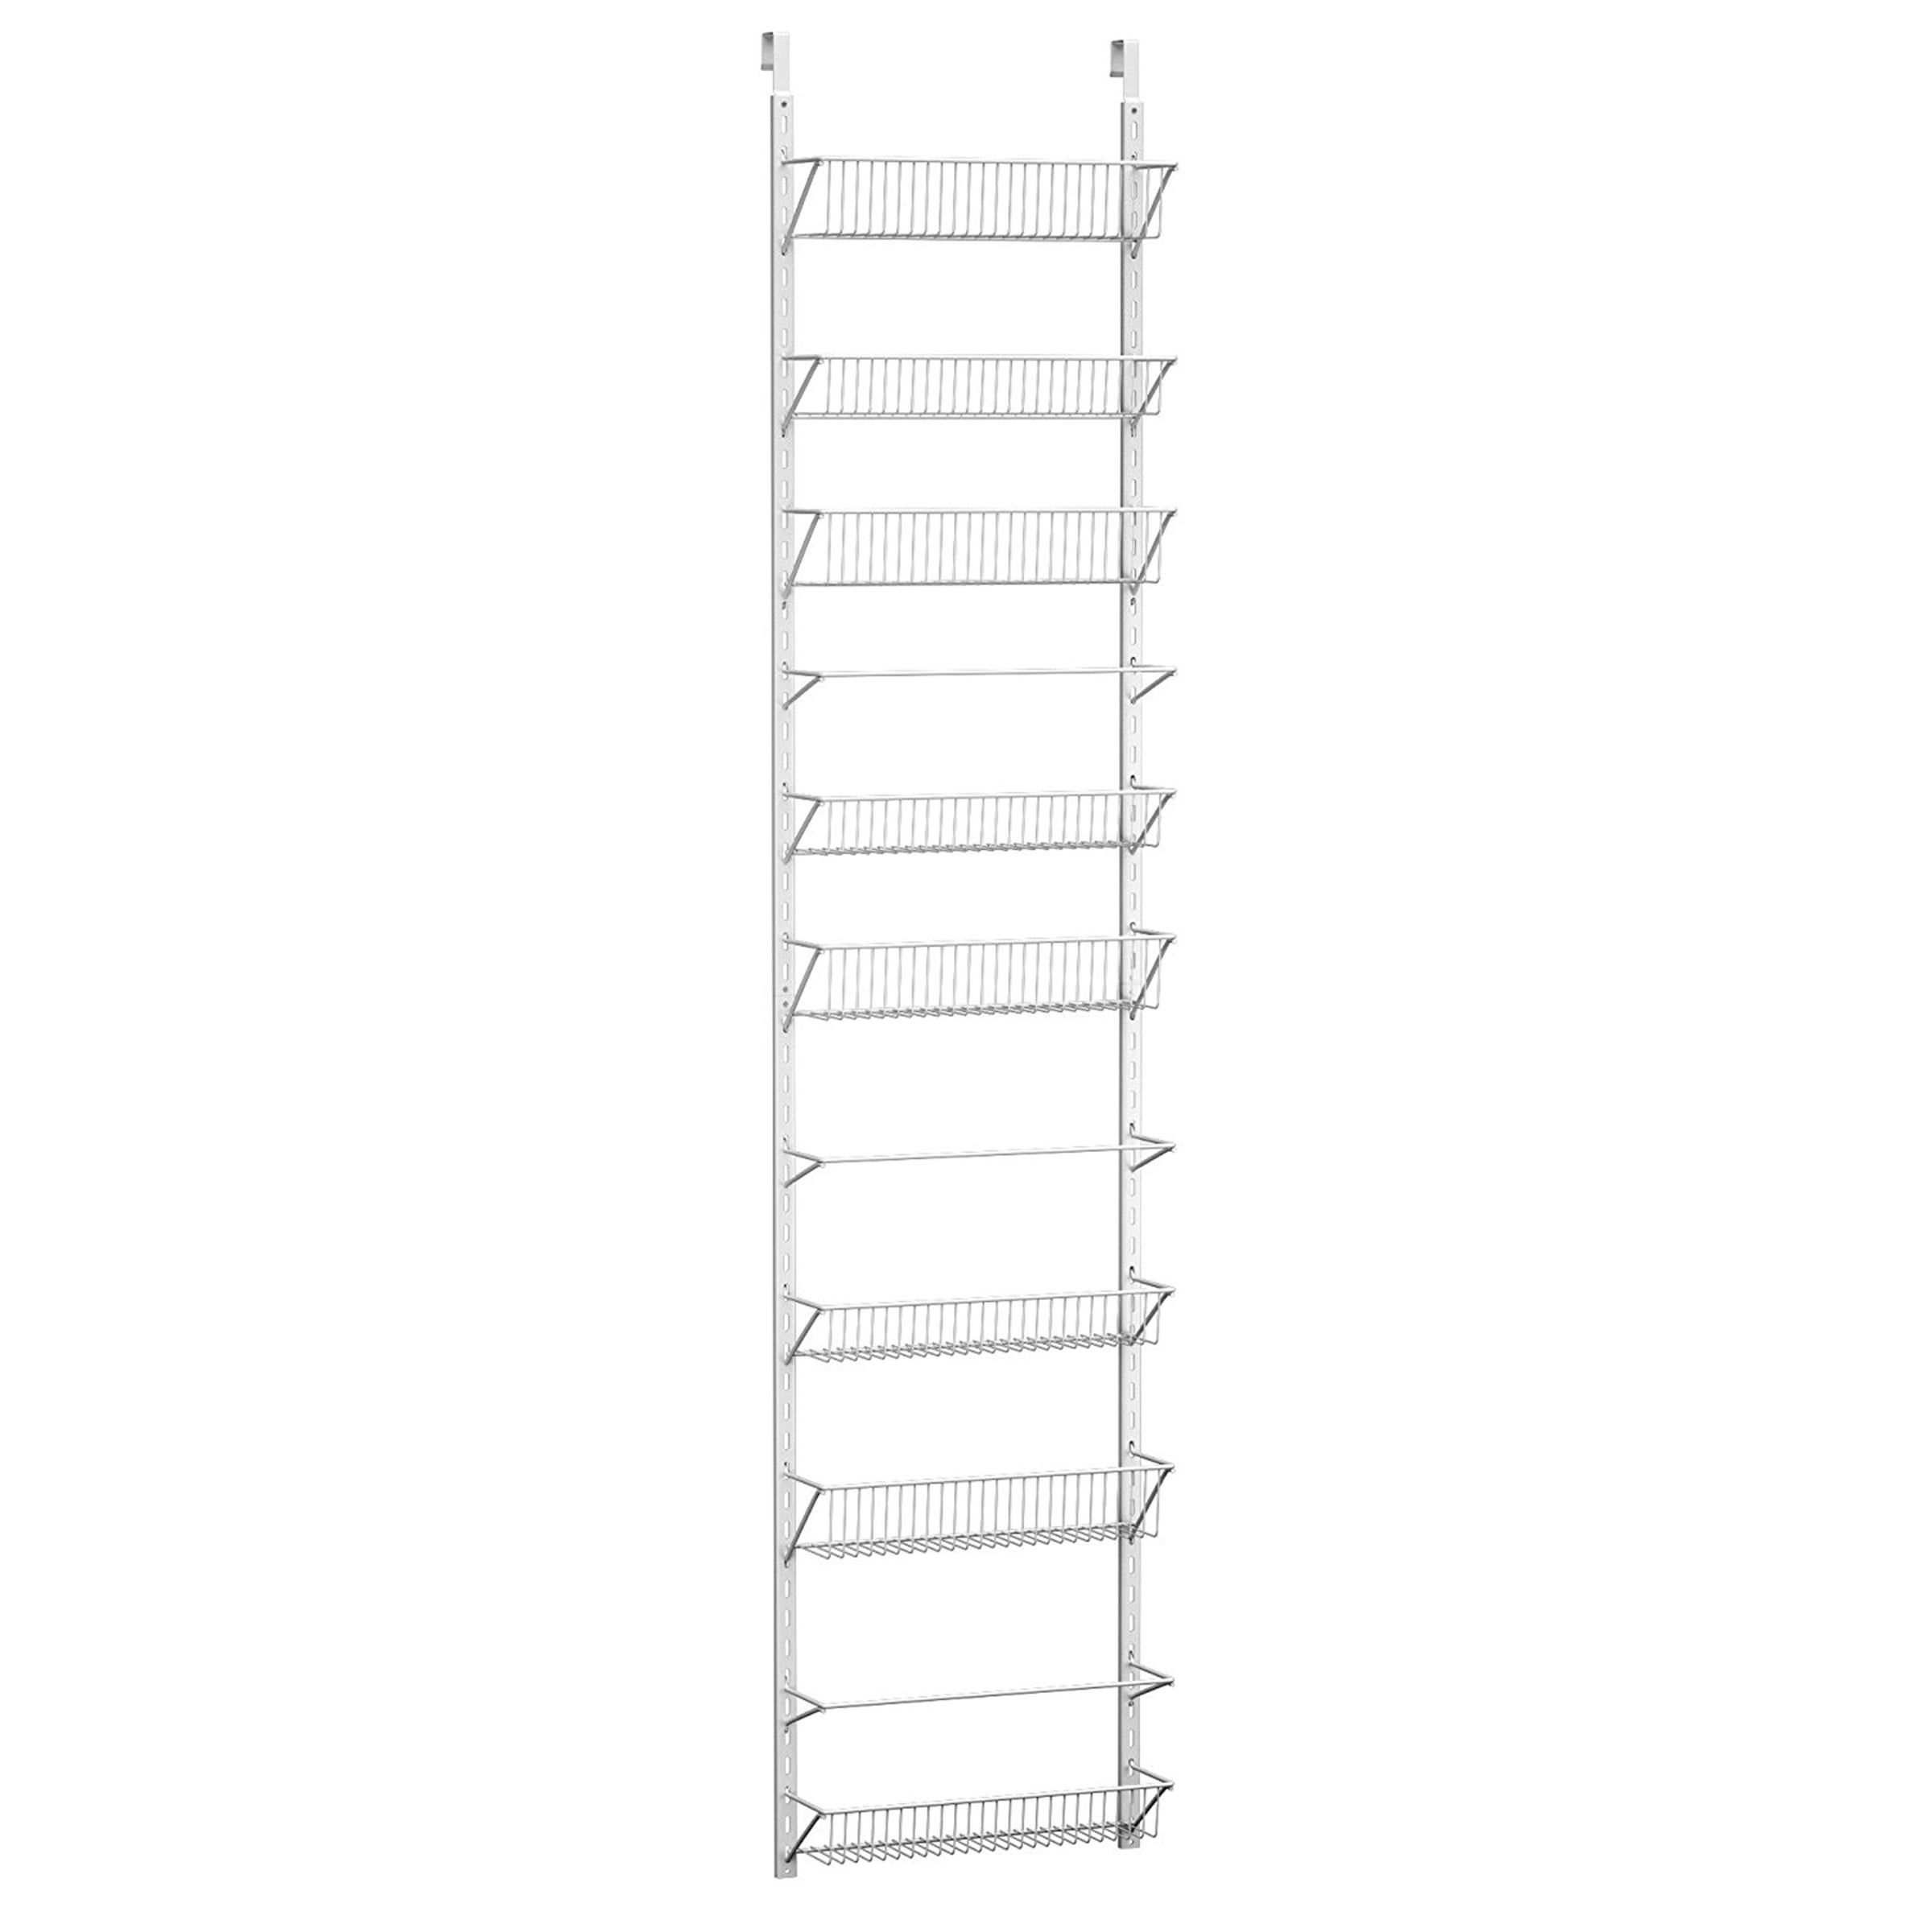 Details about   Over The Door Storage Rack 6 Shelves Kitchen Pantry Food Spice Hanging Organizer 